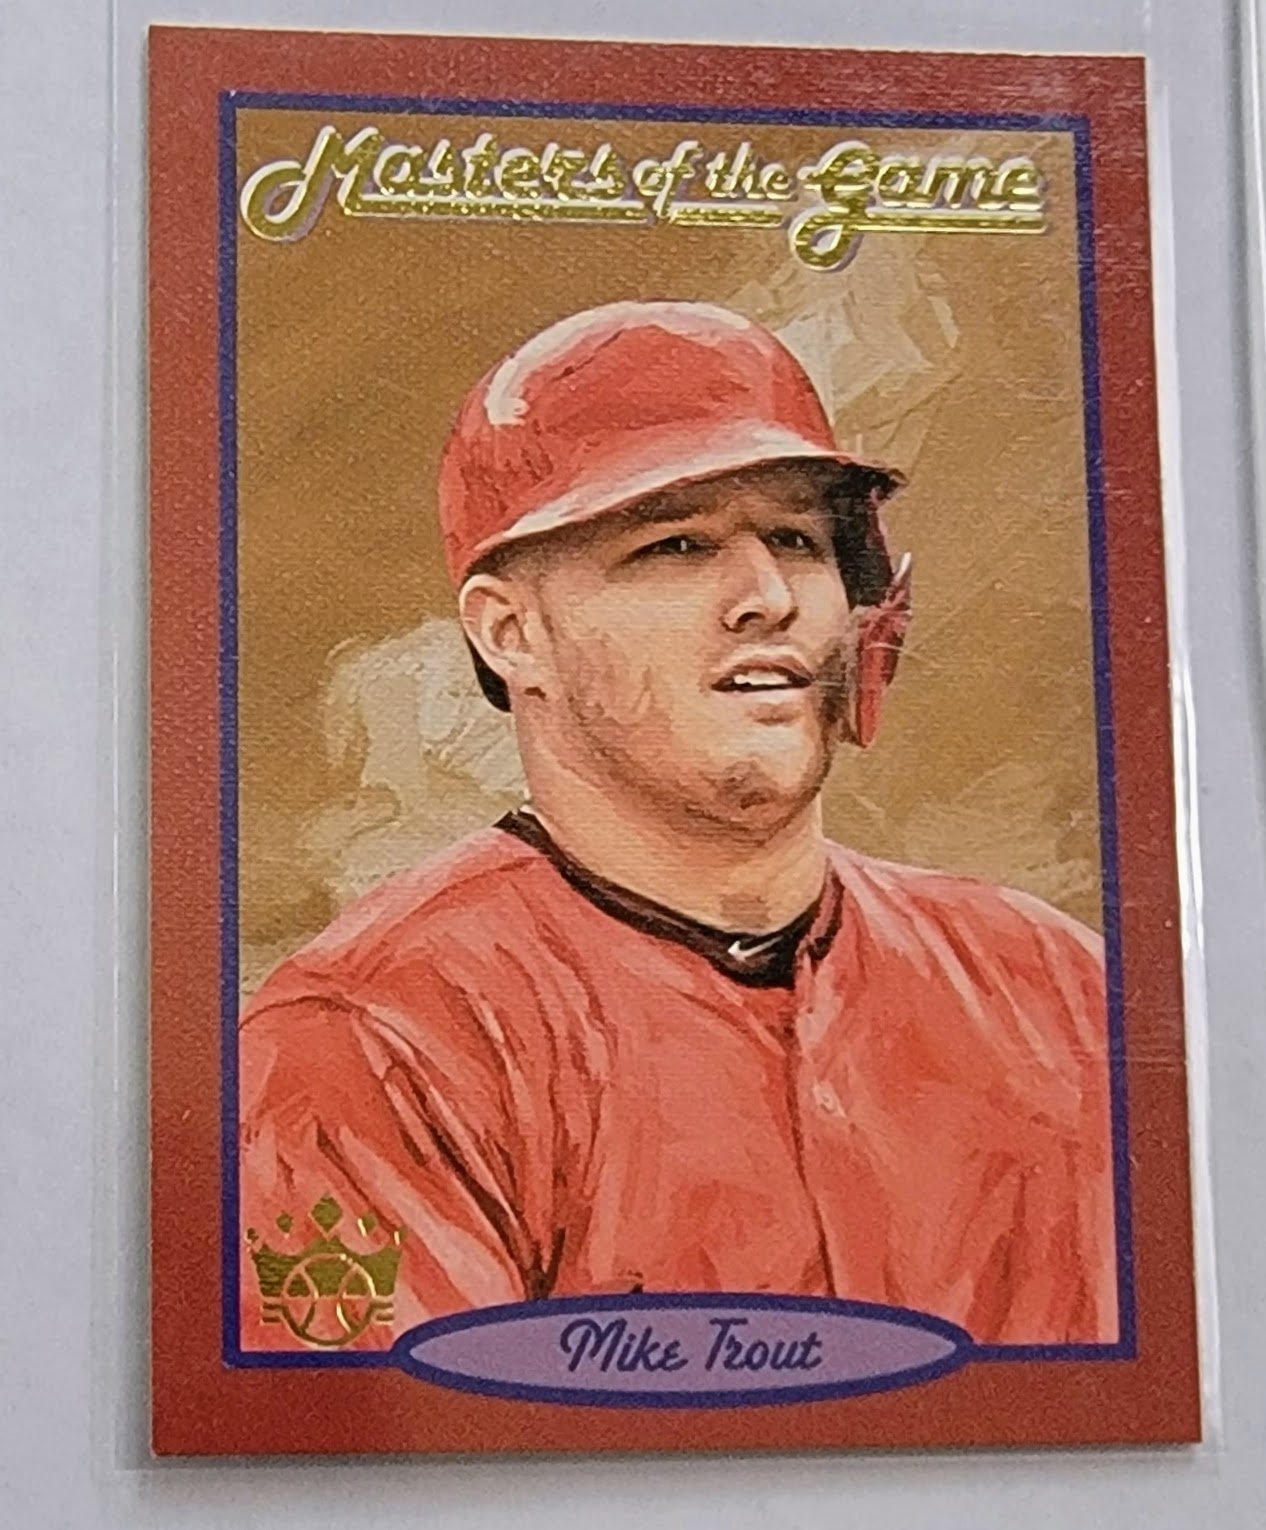 2019 Mike Trout Masters of the Game Insert Baseball Card TPTV simple Xclusive Collectibles   